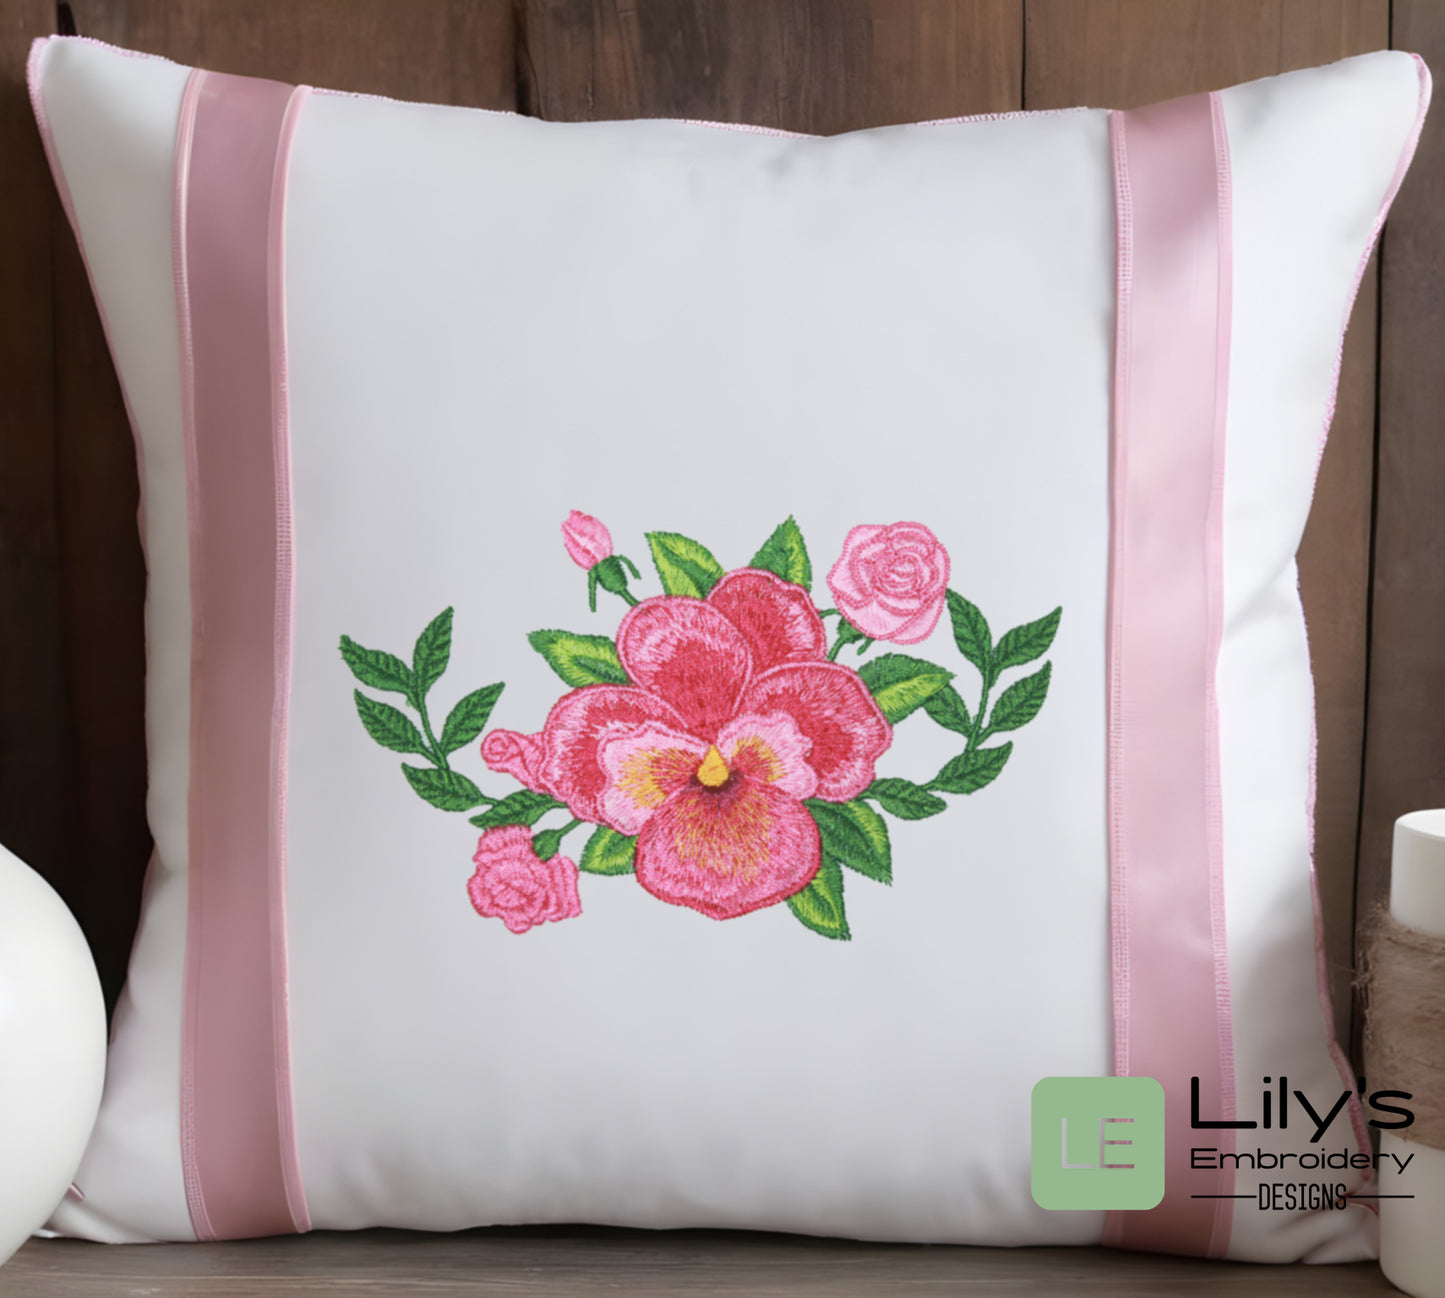 Pansy Machine Embroidery design  embroidered on a pillow